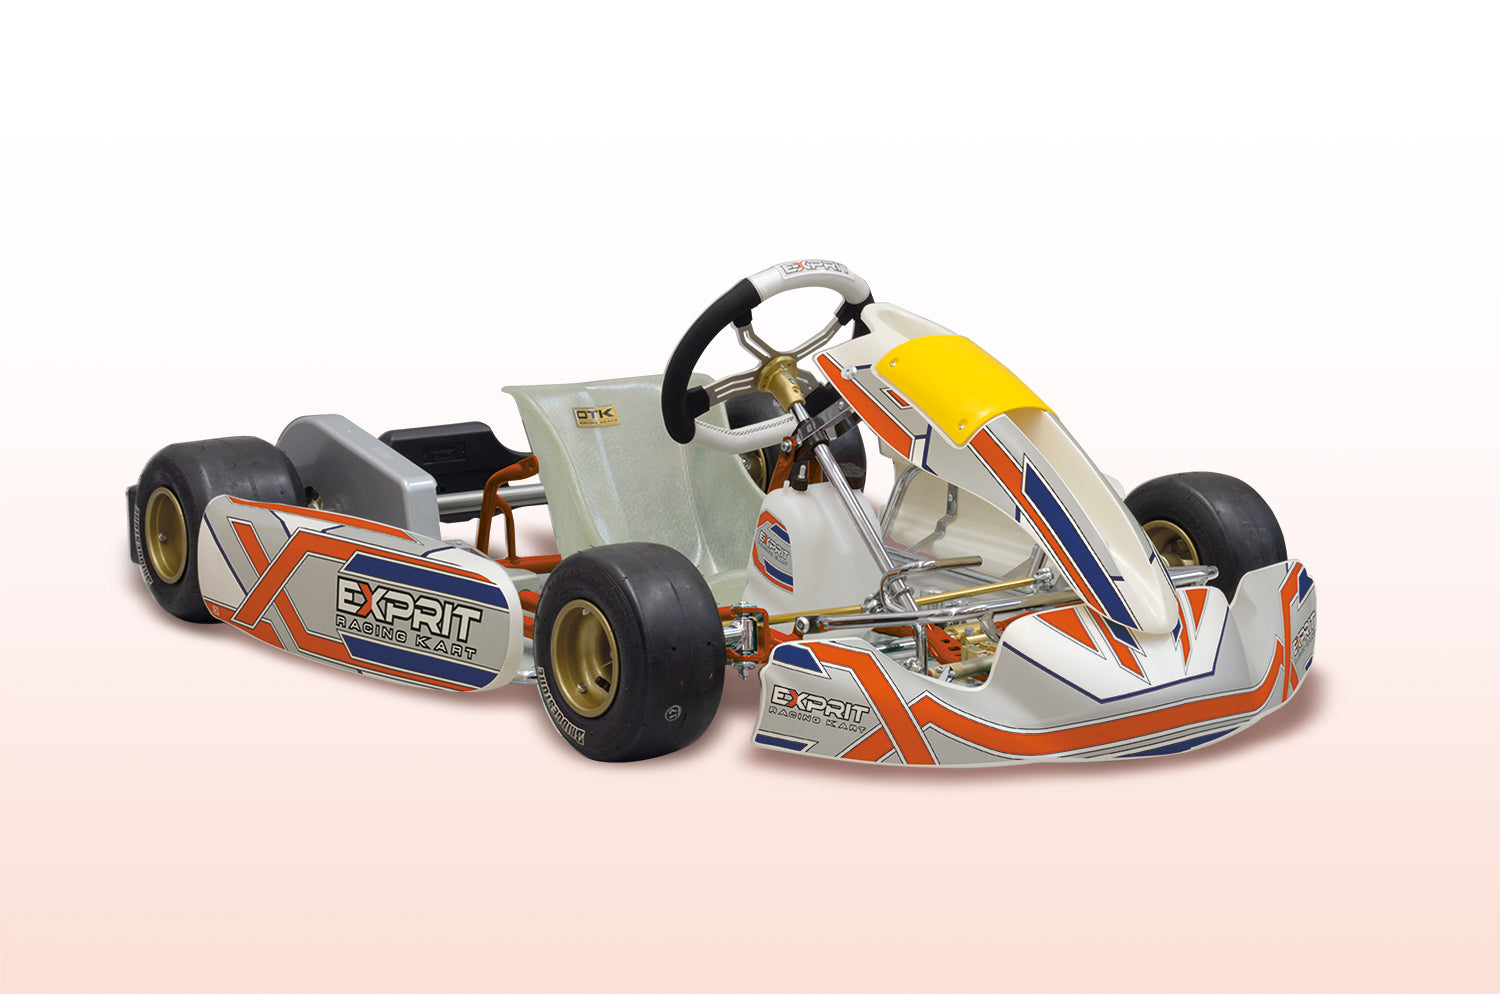 EXPRIT NORDIK CHASSIS 1010mm 30mm Axle